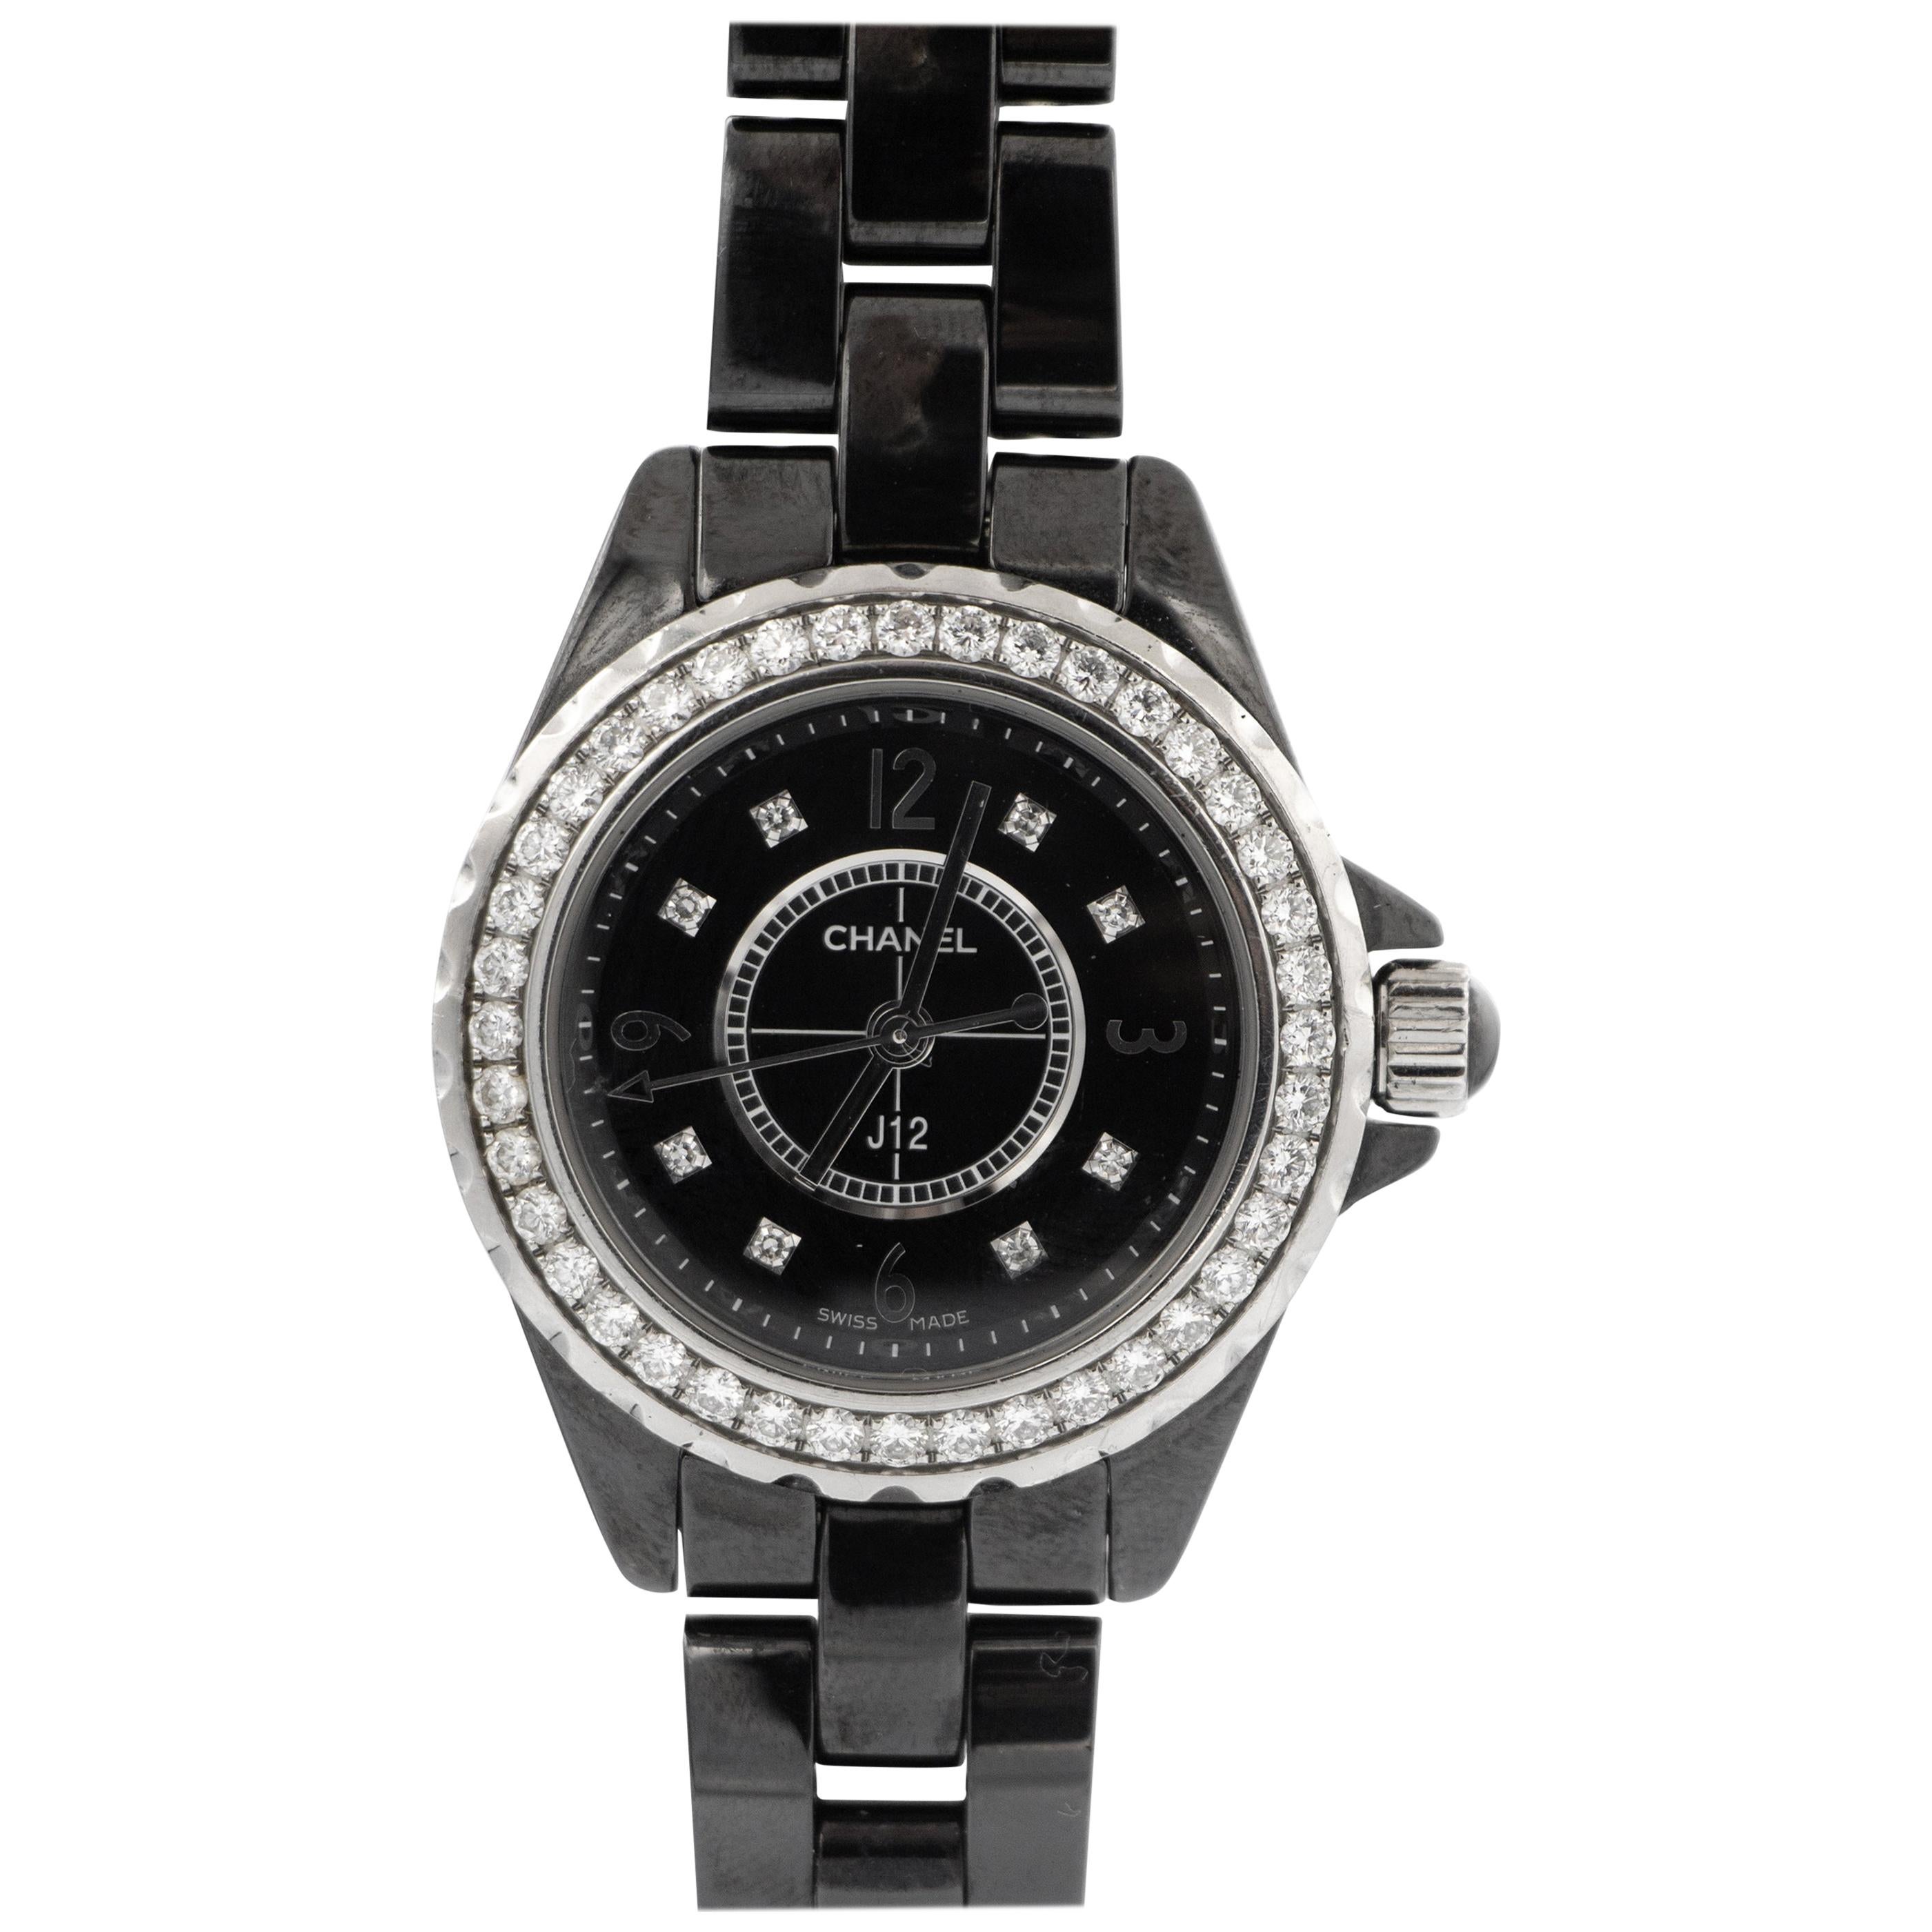 J12 Chanel Black Highly Resistant Ceramic and Steel Watch at